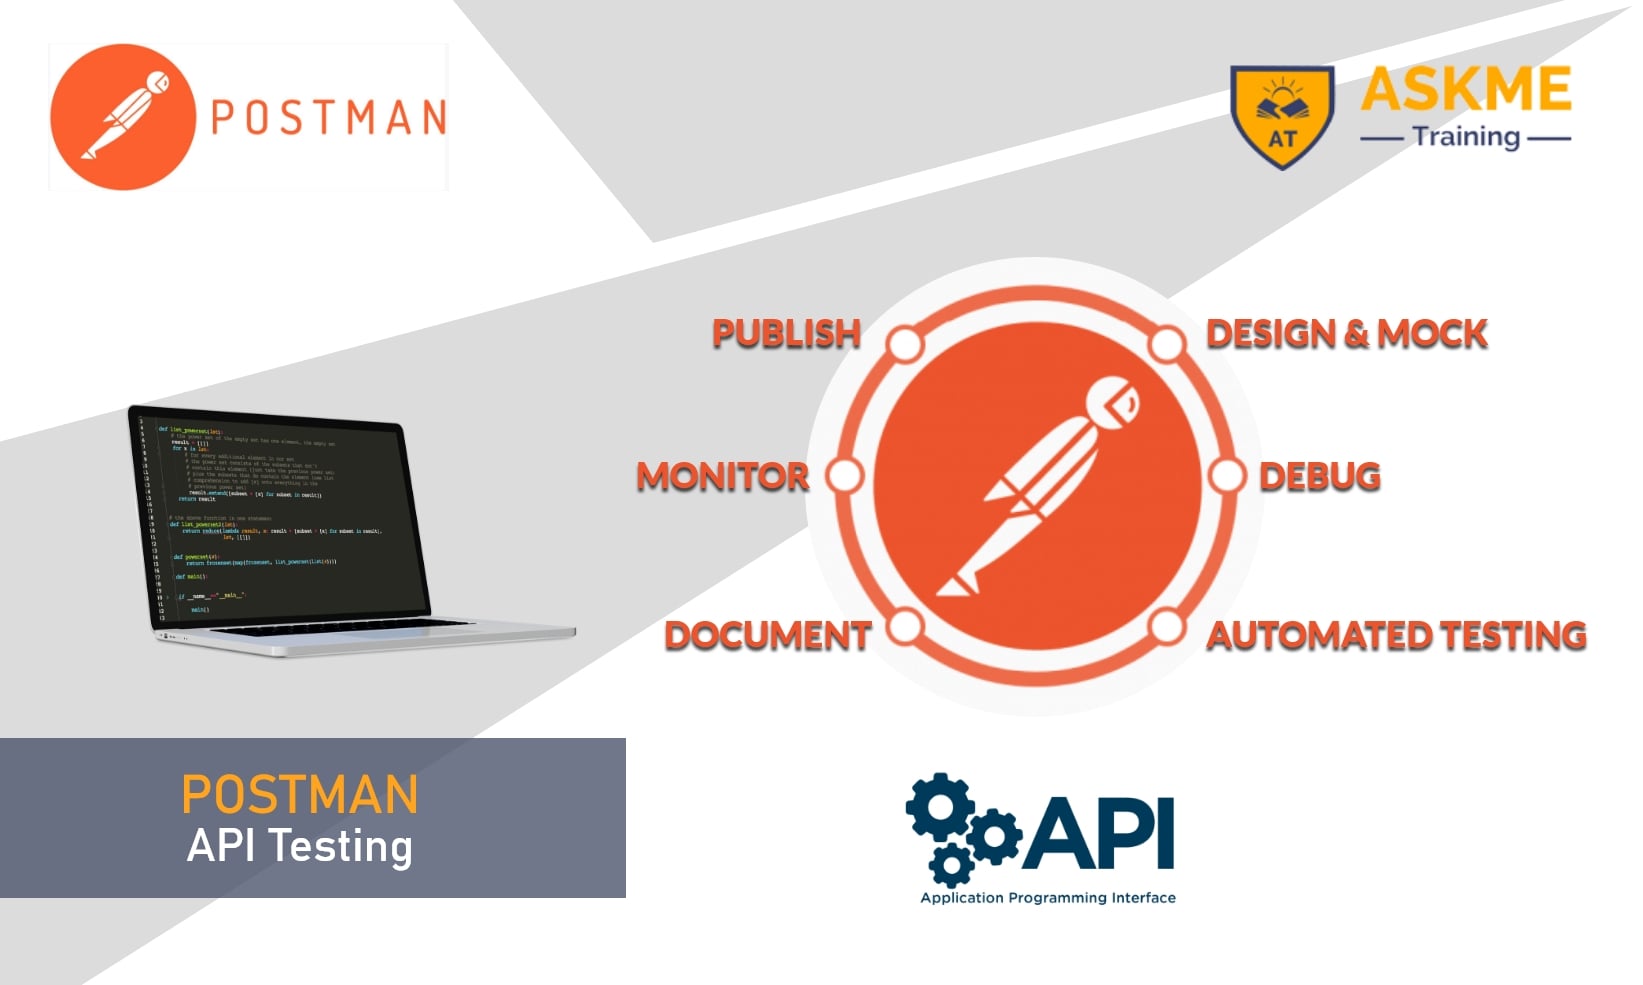 API Testing using Postman training course and certification